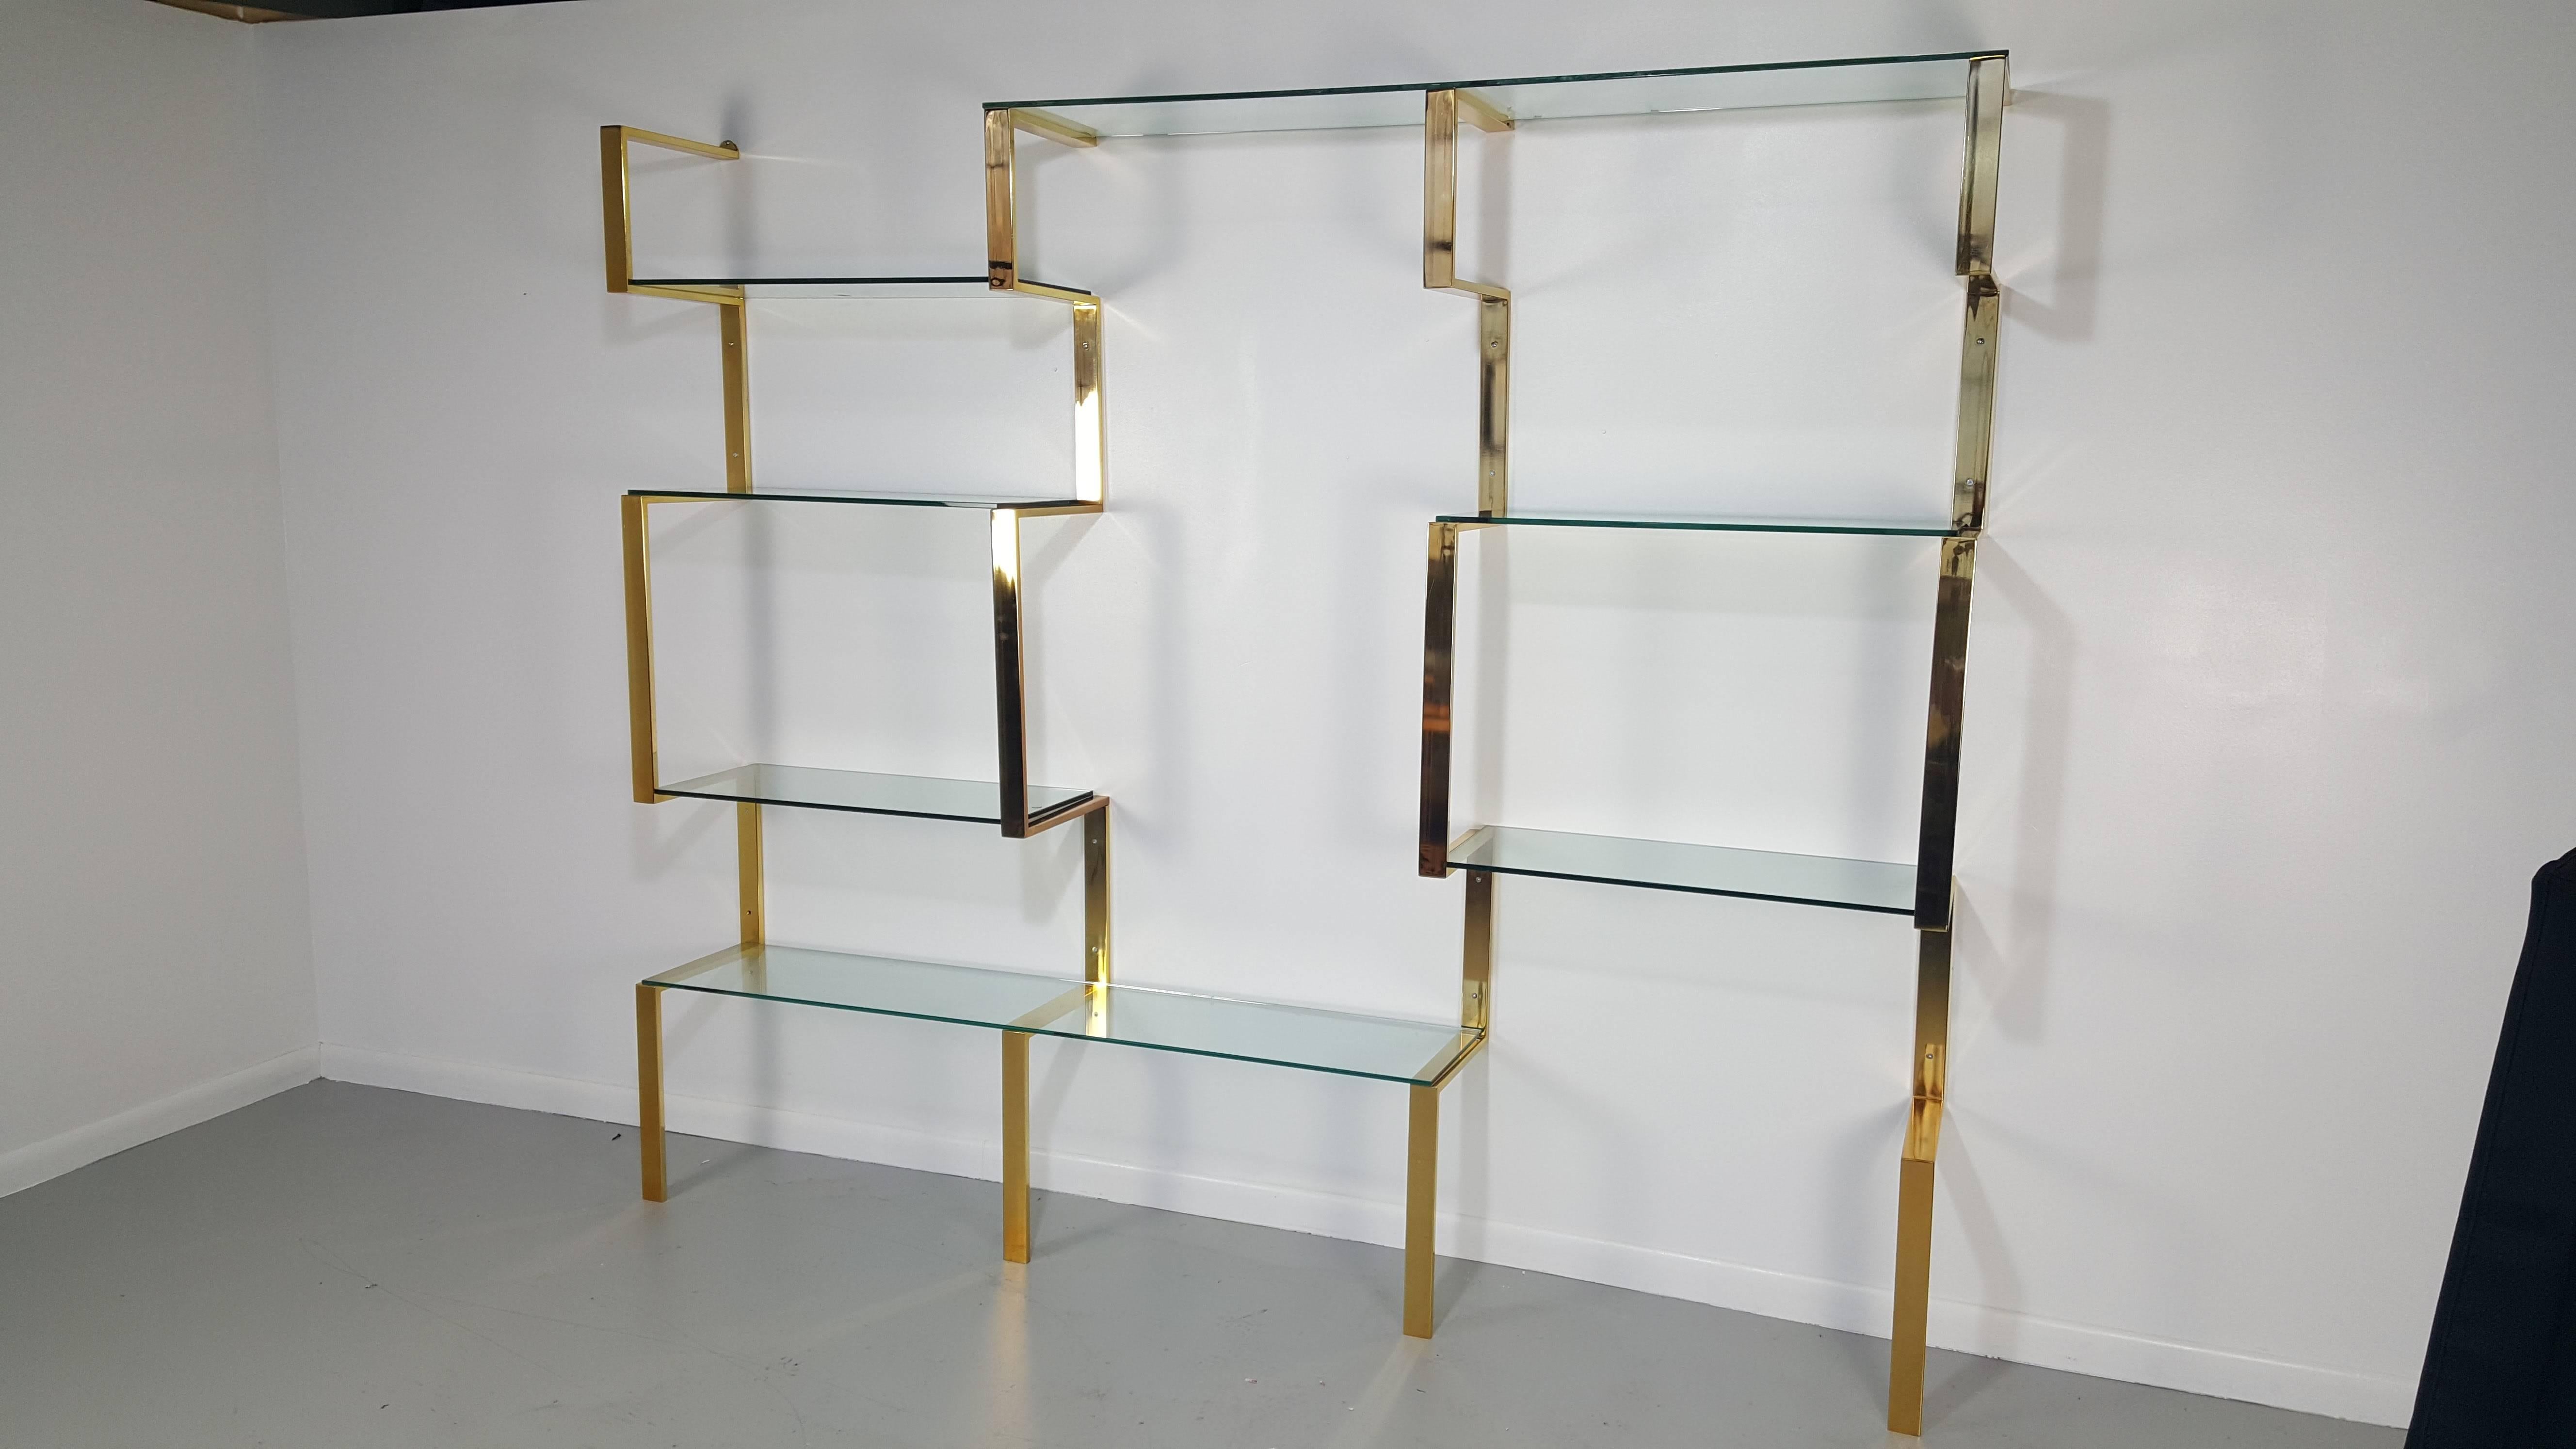 Late 20th Century Architectural Brass Etagere Shelving Unit after Milo Baughman, 1970s